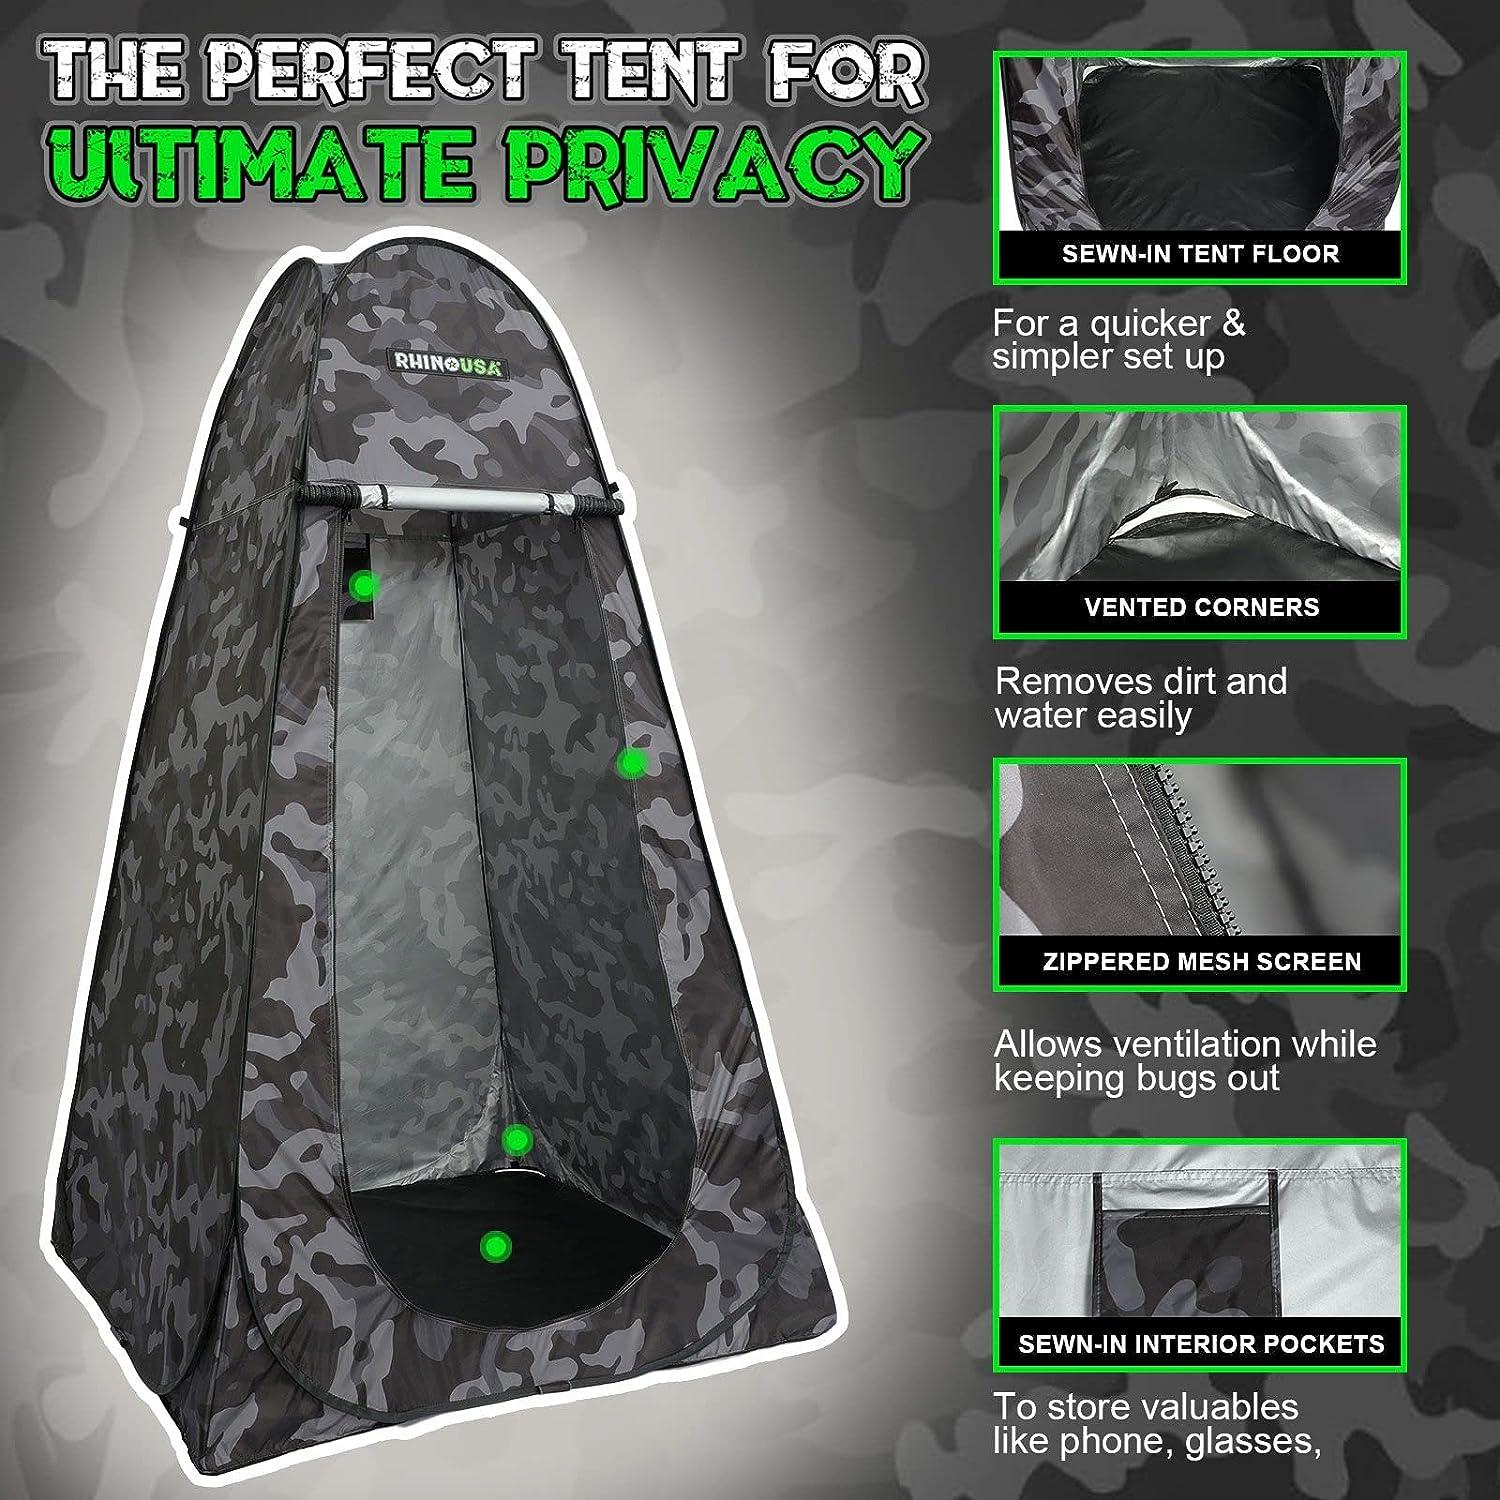 Rhino USA Portable Pop Up Privacy Changing Tent - Ultimate Outdoor Camping  Shower, Camp Toilet, Rain Shelter for Beach and Camping - Lightweight and  Sturdy, Instant Setup While On-The-Go CAMO